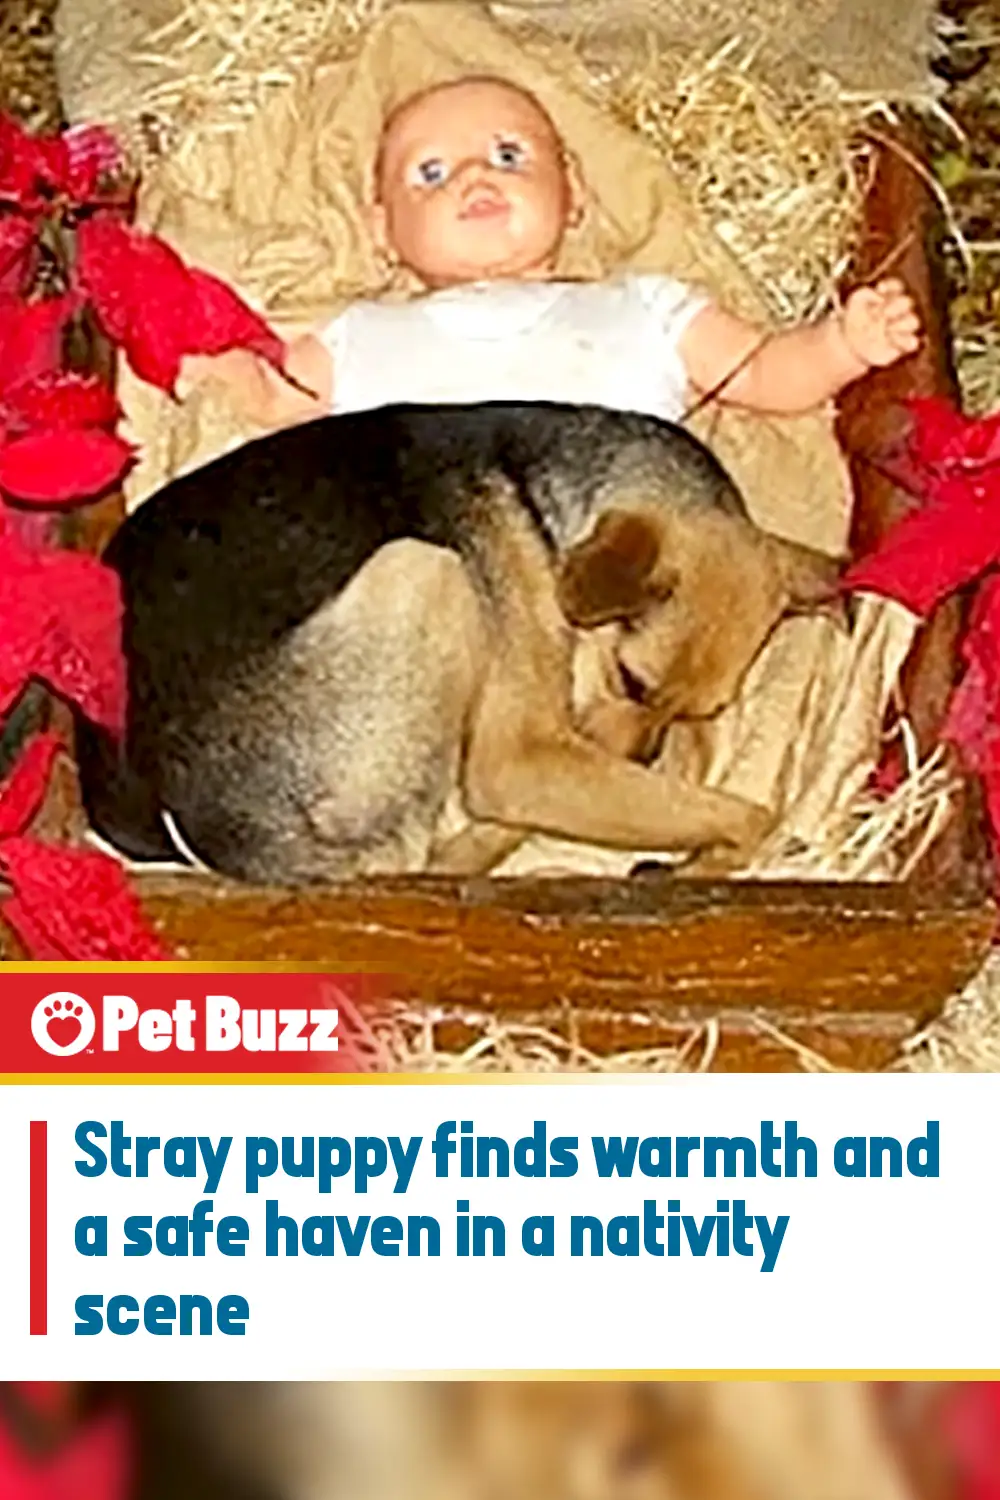 Stray puppy finds warmth and a safe haven in a nativity scene